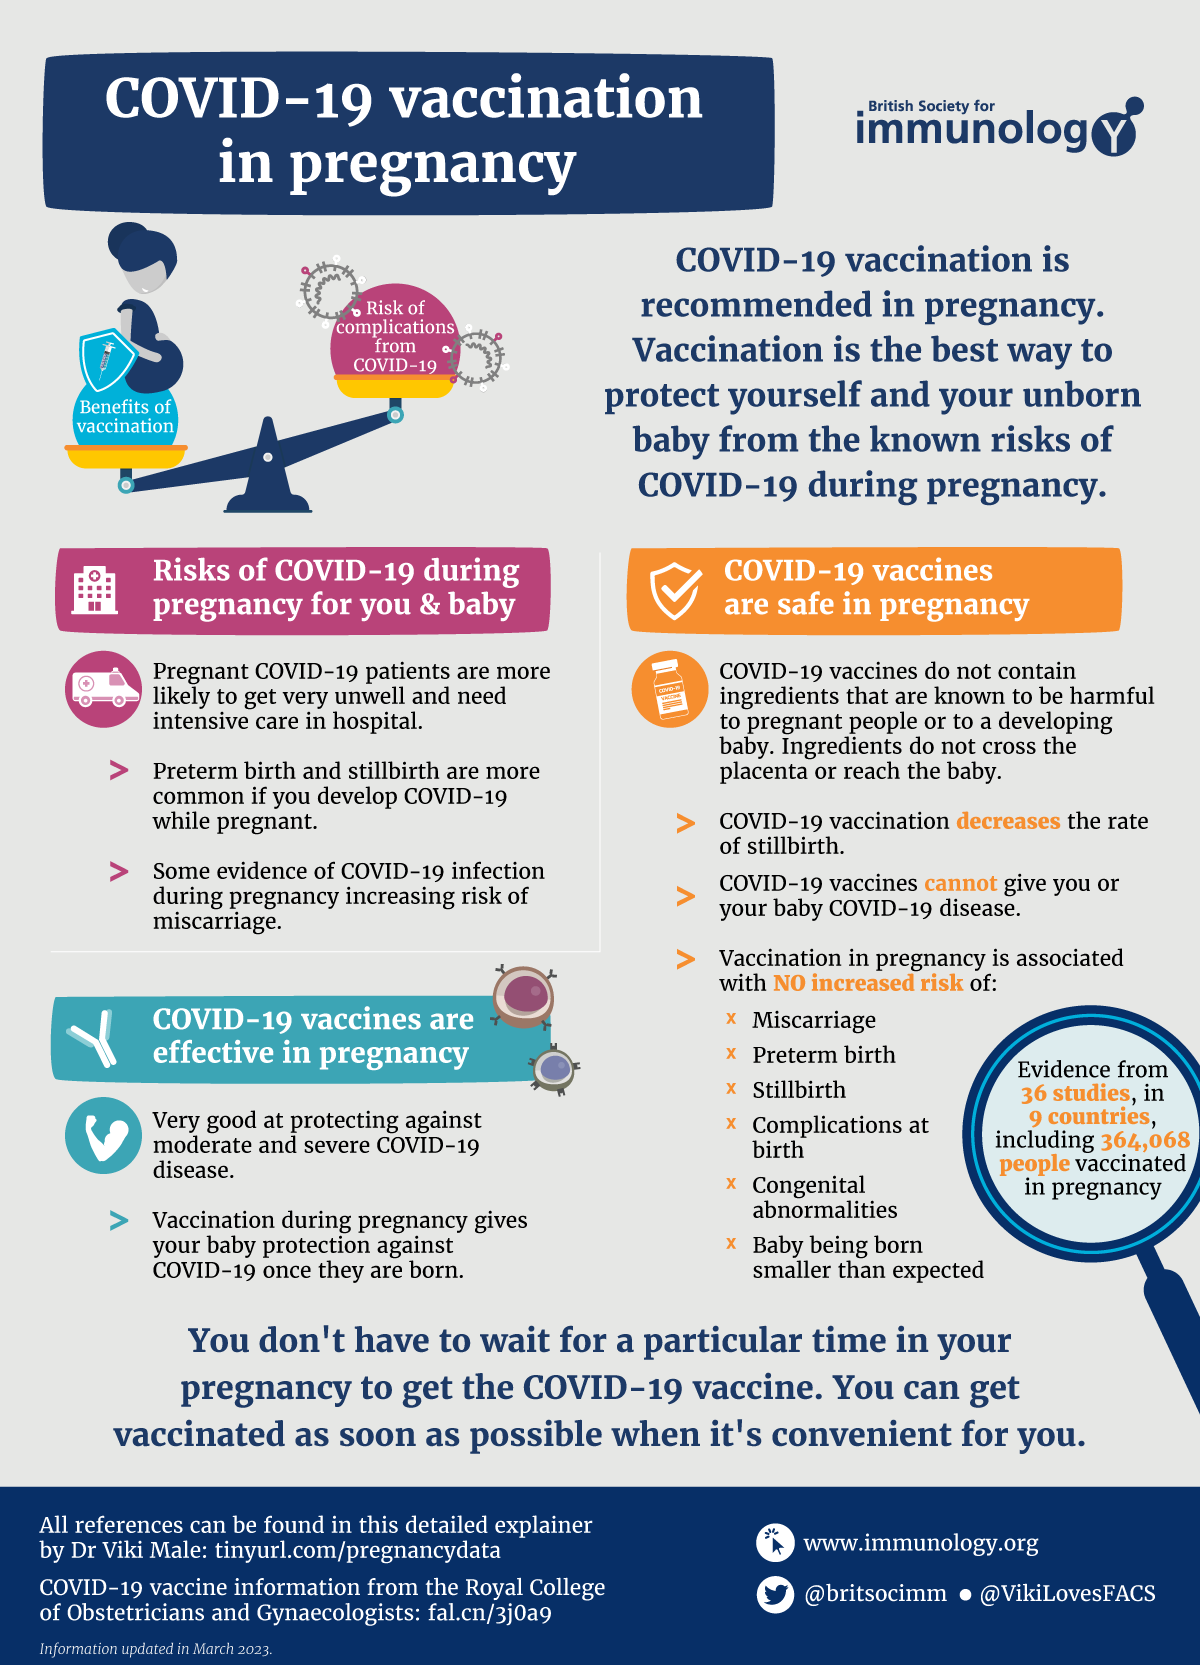 COVID-19 vaccines in pregnancy infographic